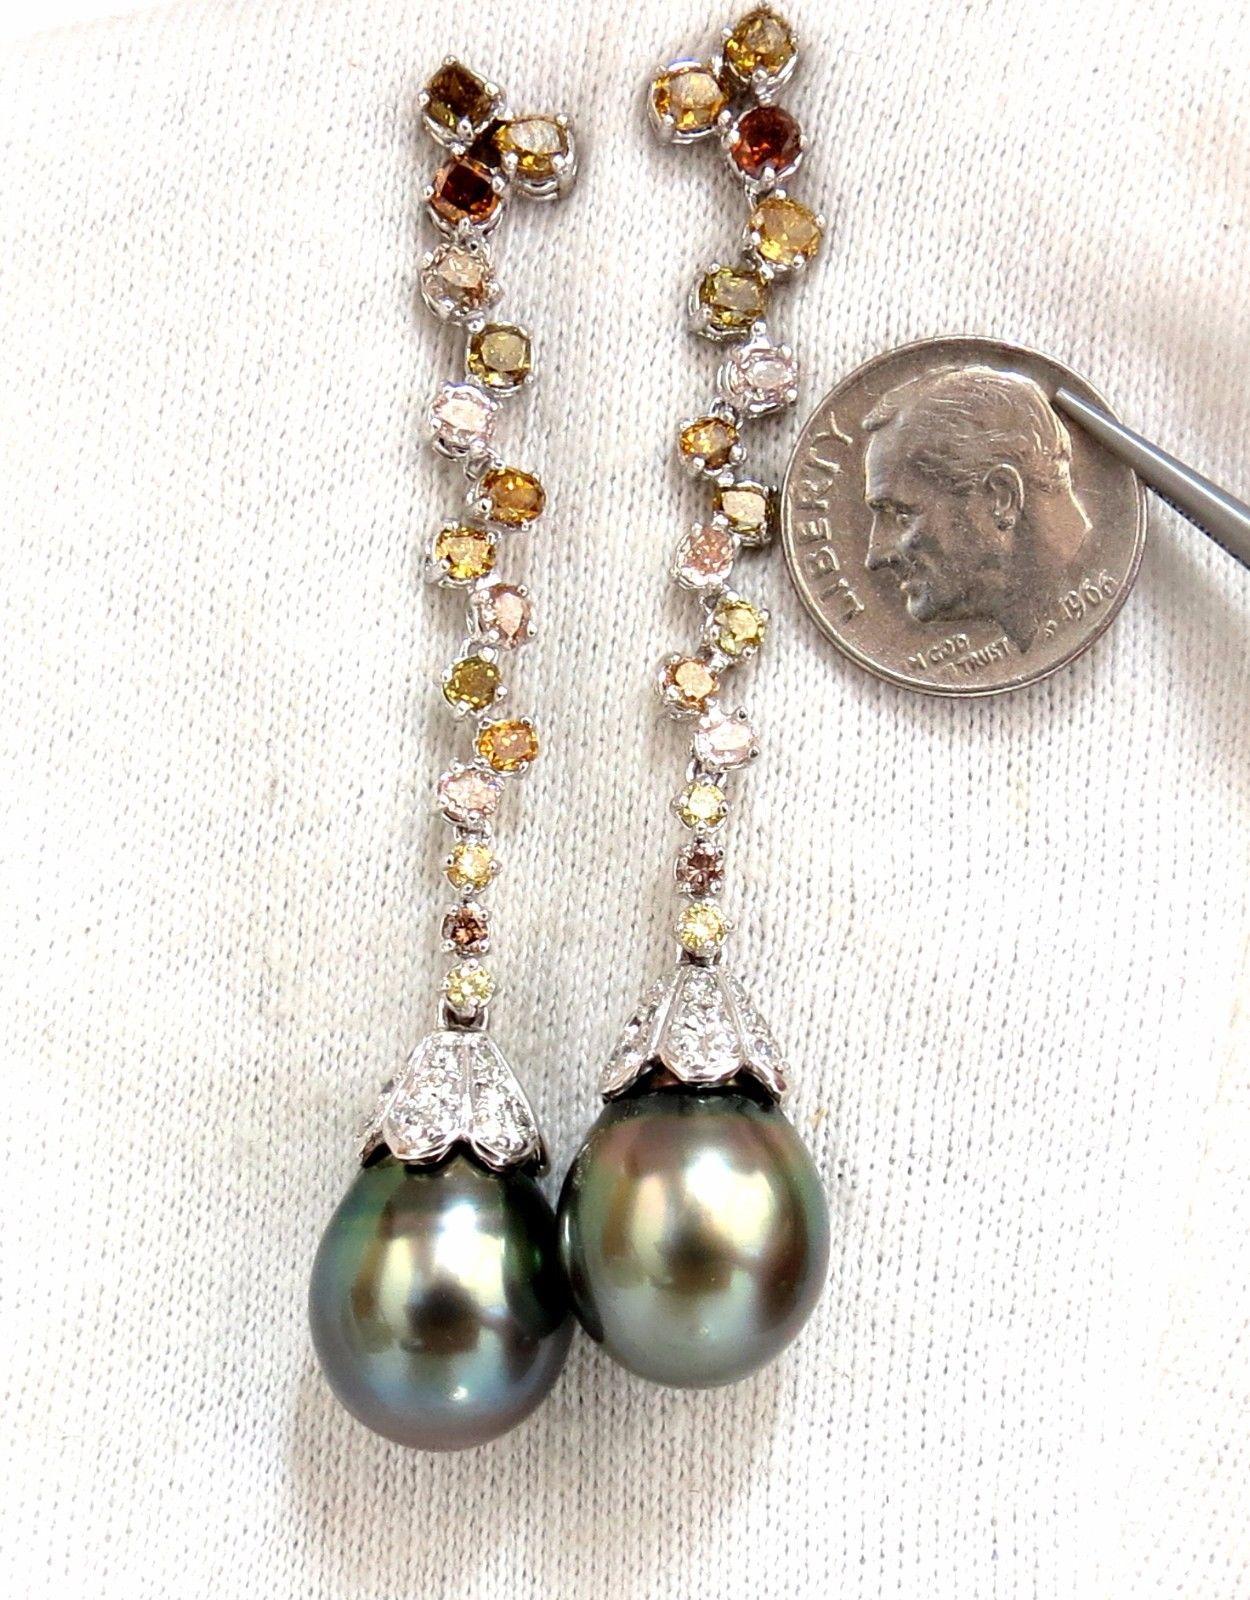 Peacock Color Dangles

12.70mm Natural Tahitian peacock pearls

Gorgeous green overtone & slight pink fade.

clean clarity, No pits or naturals.

3.60cts of round natural color diamonds: 

Light pinks, yellow, orange, brownish yellows and greenish